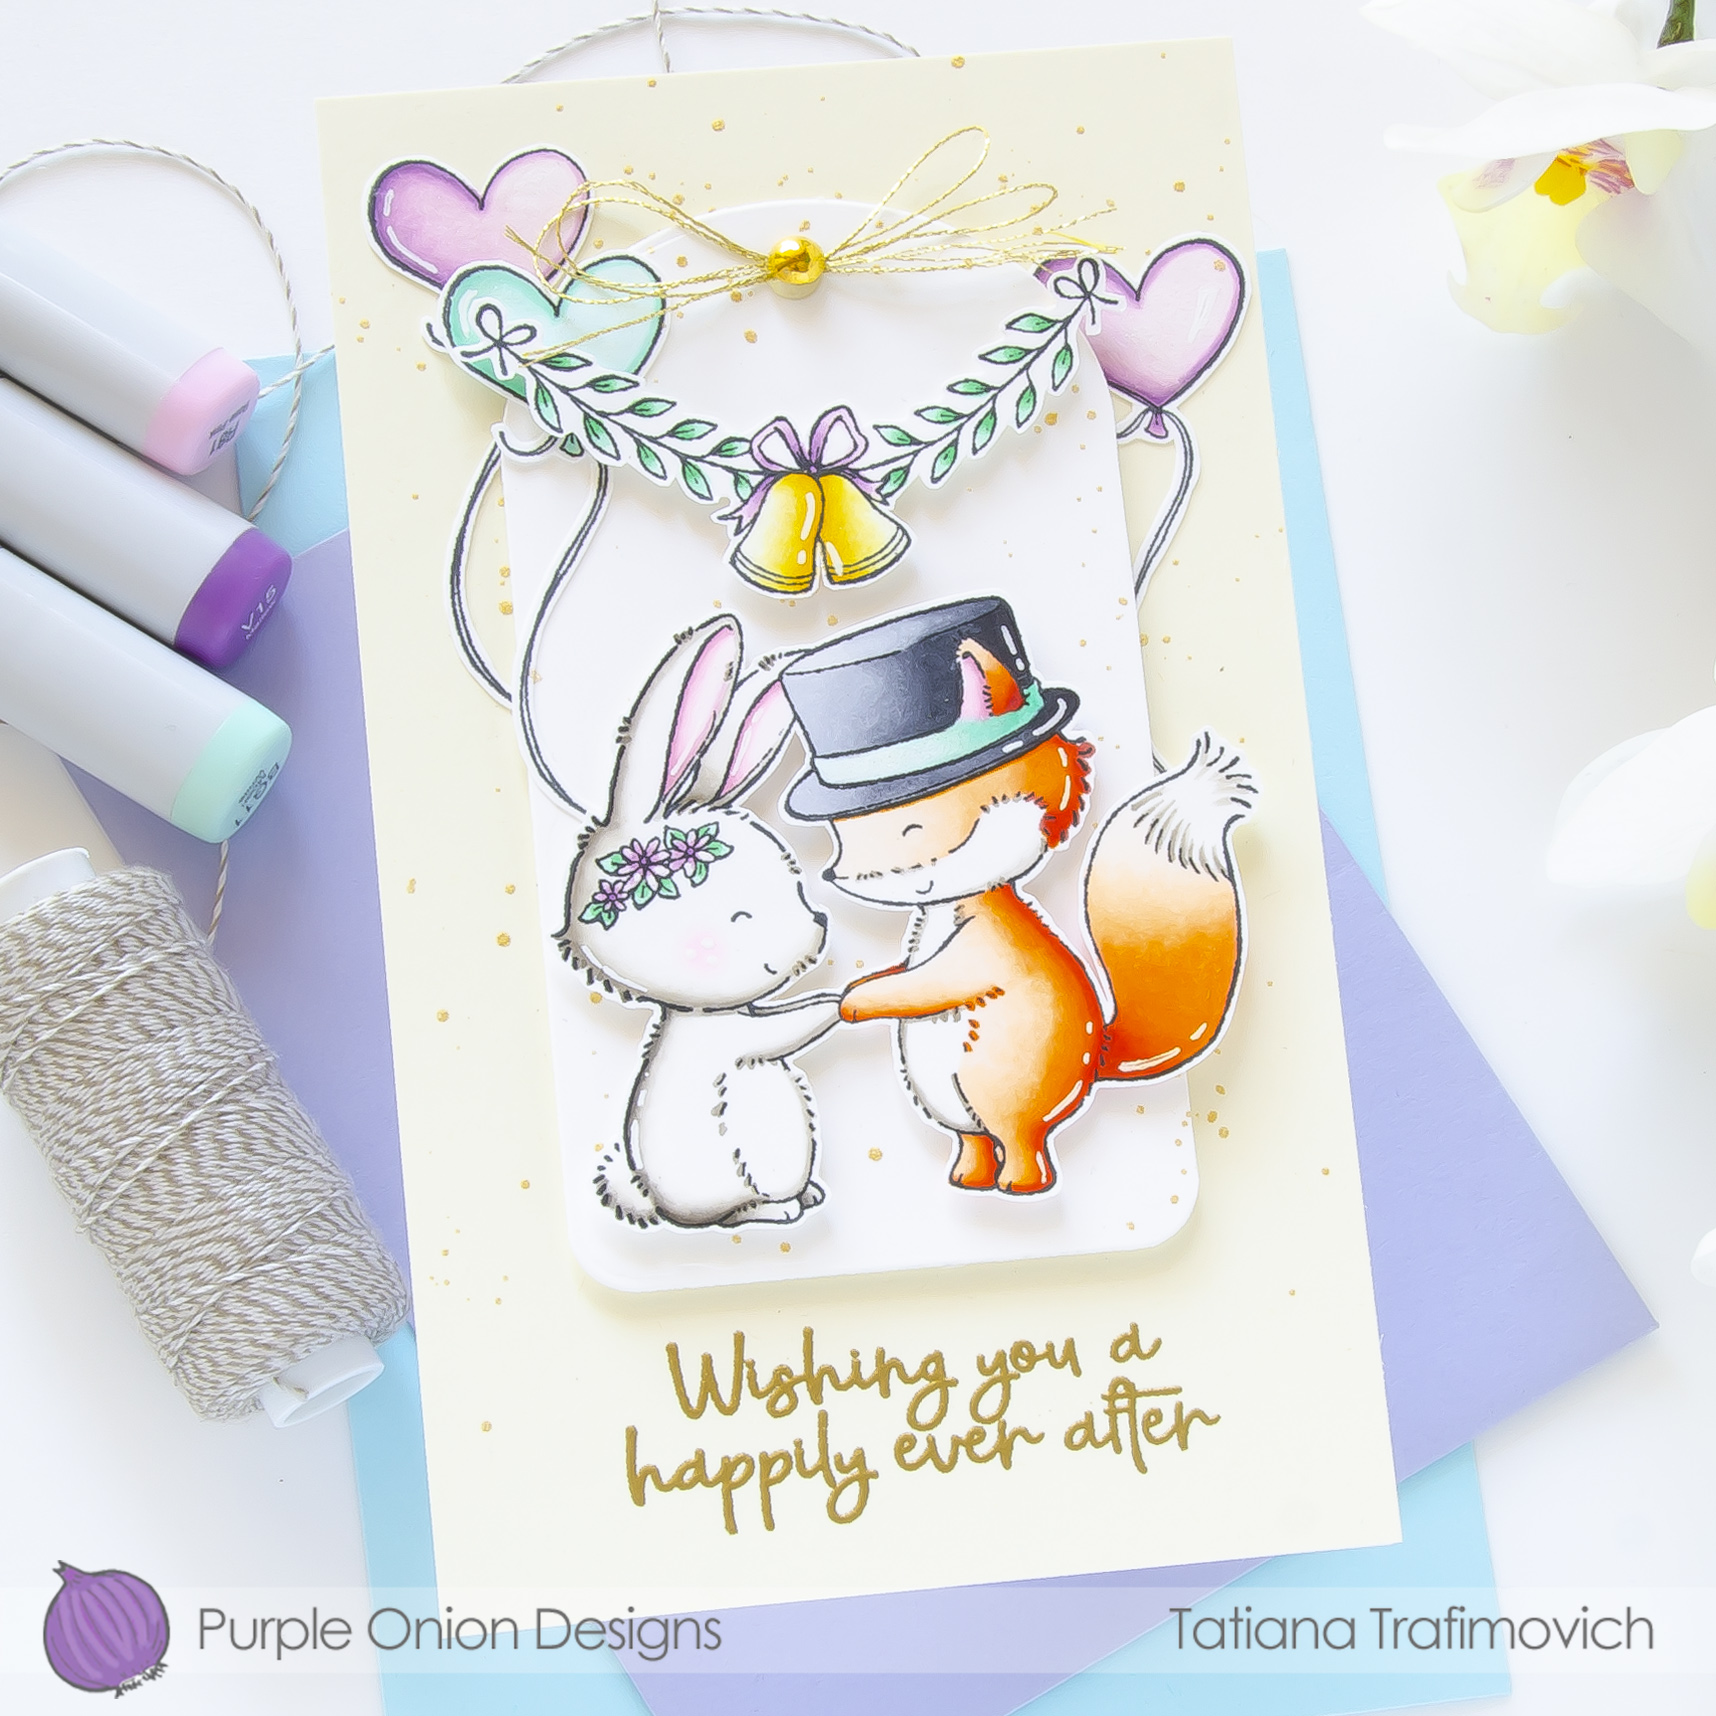 Wishing You A Happily Ever After #handmade card by Tatiana Trafimovich #tatianacraftandart - stamps by Purple Onion Designs